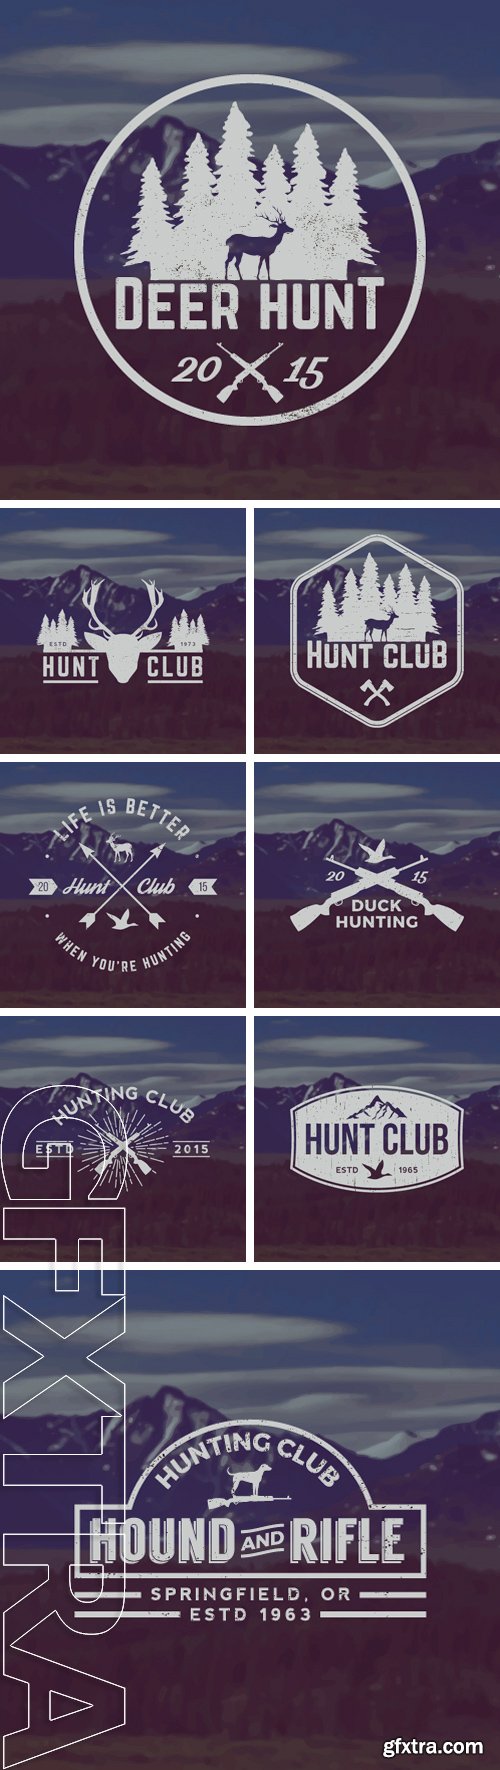 Stock Vectors - Vector hunting club emblem with grunge texture on mountain landscape background